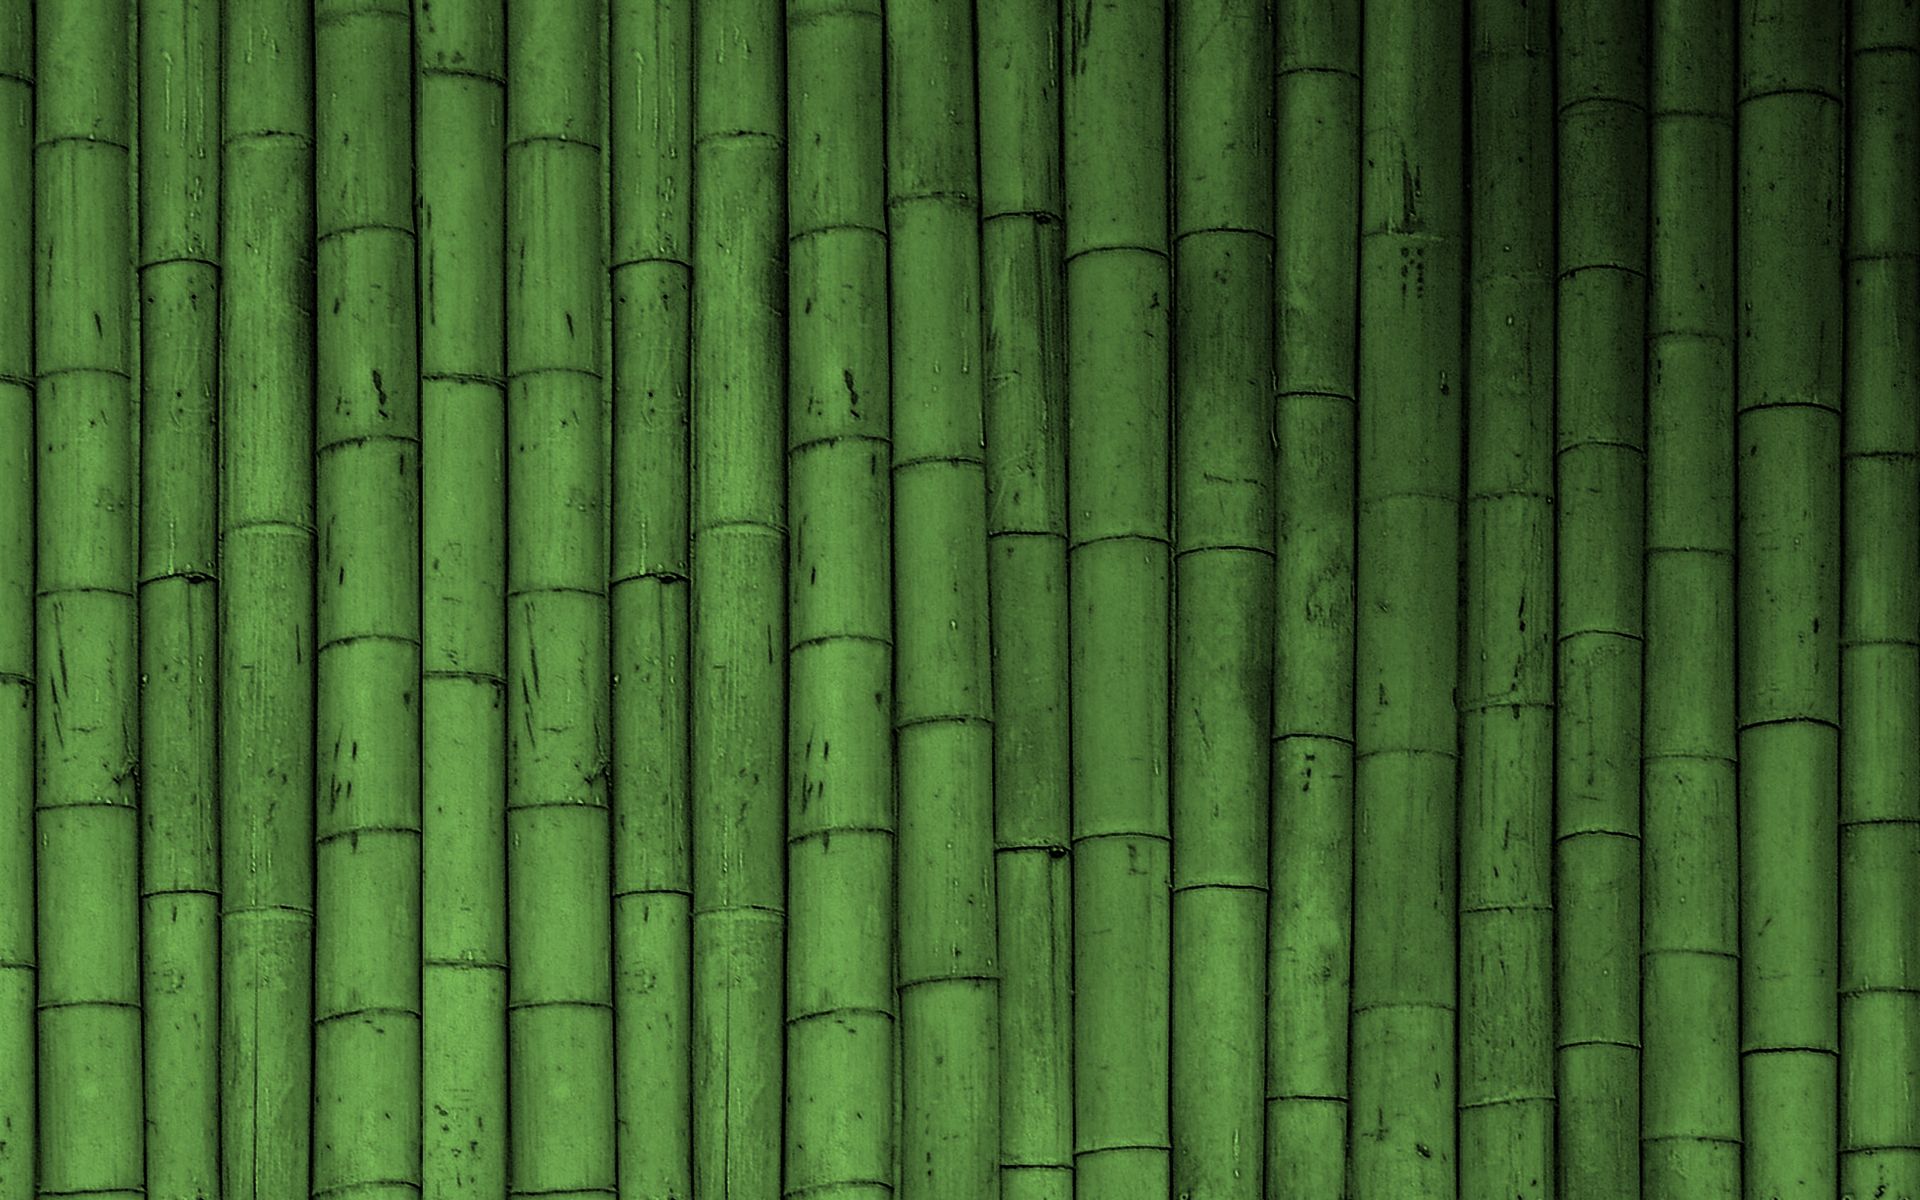 Green HD Wallpapers Download Free 